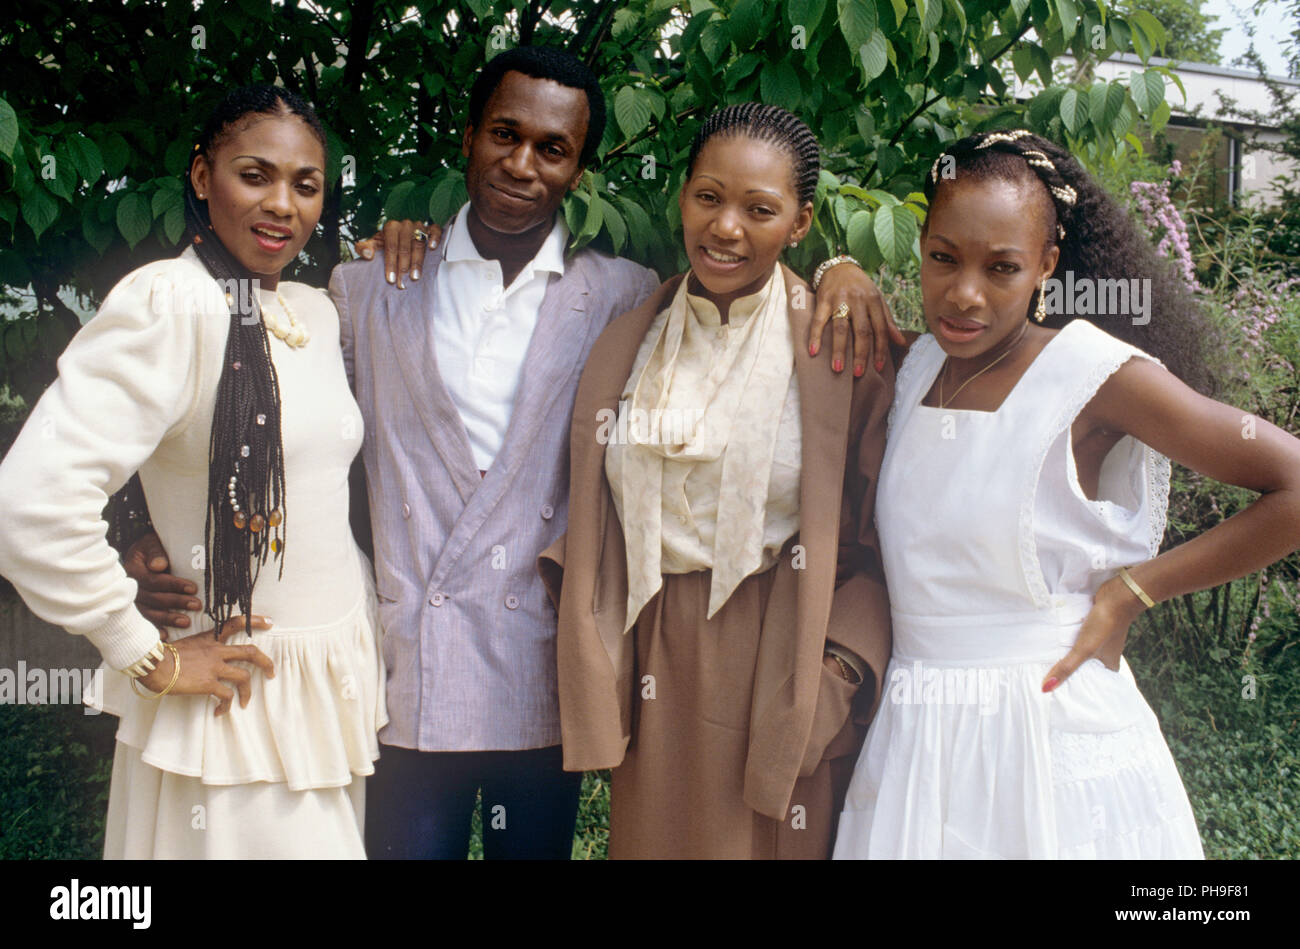 Bobby Farrell | Getty Images